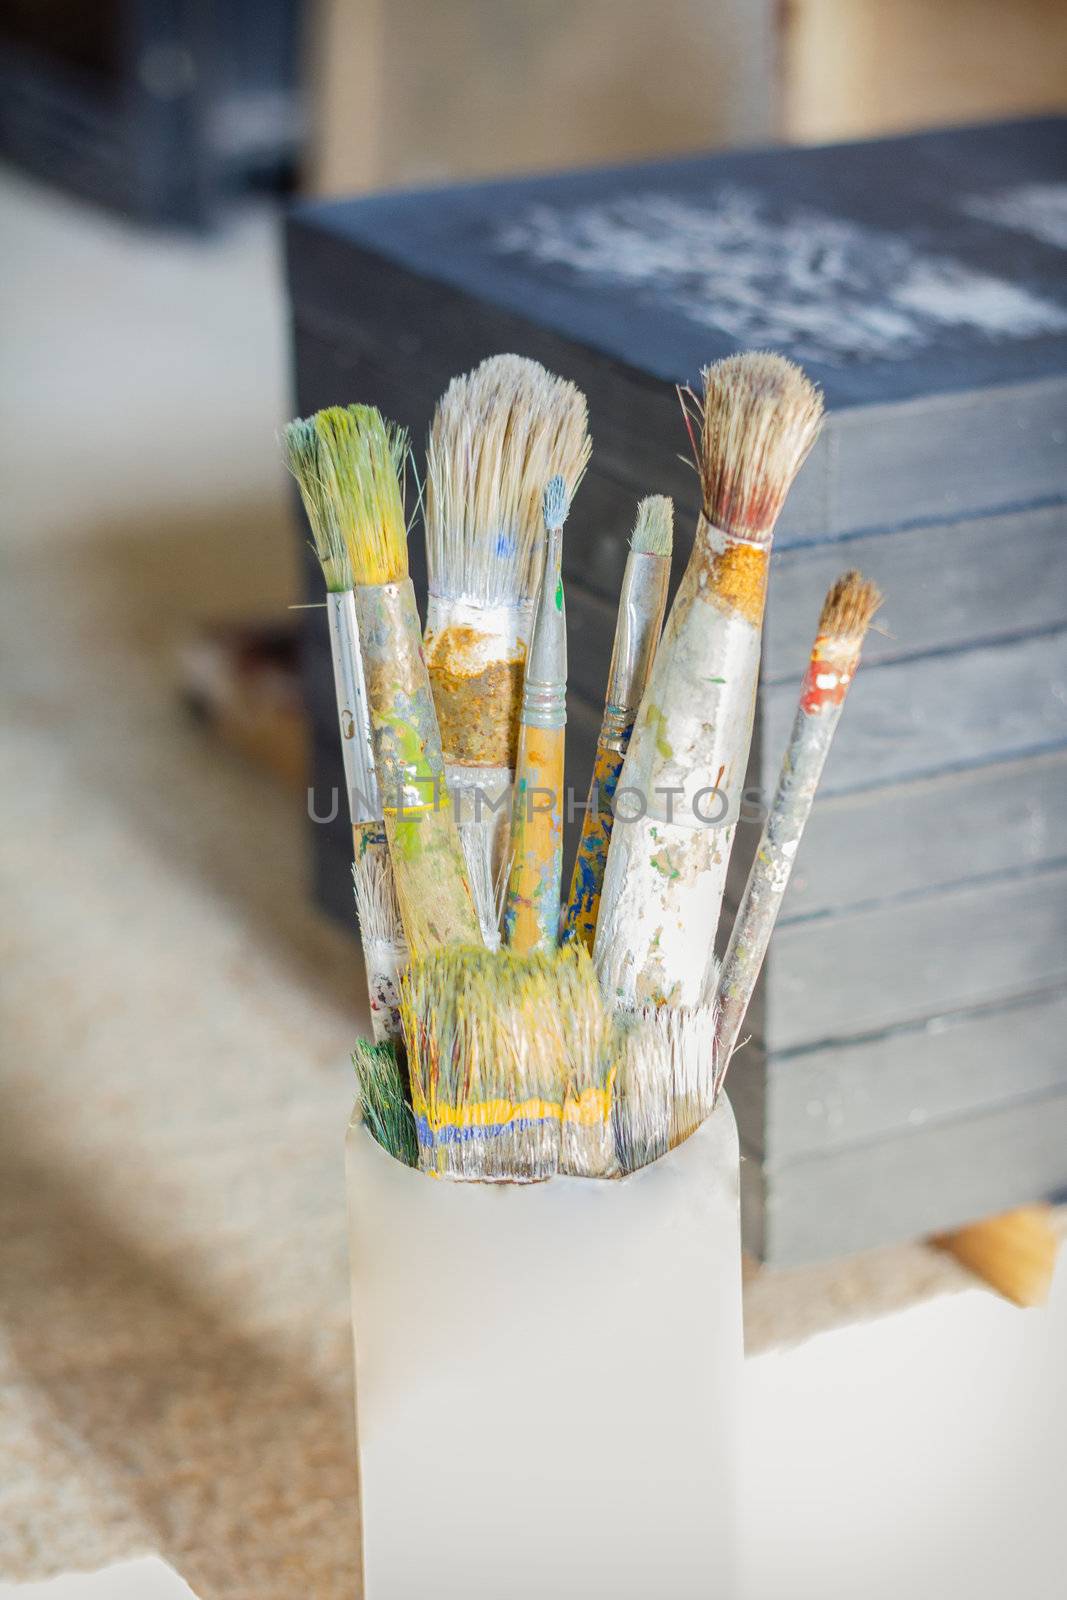 Set of paint brushes on jar, in front of artistic canvas